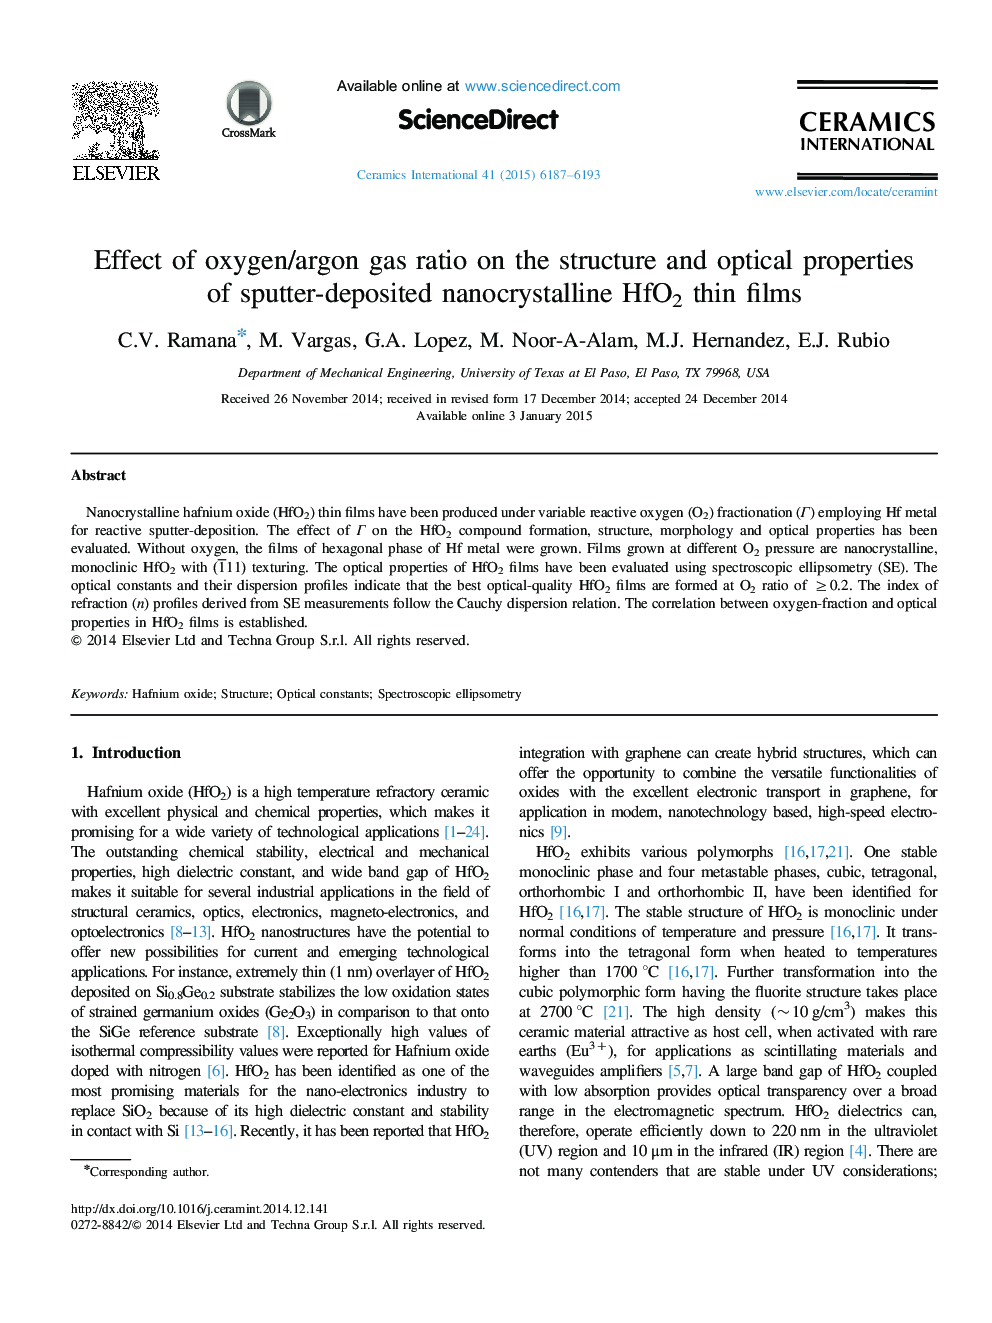 Effect of oxygen/argon gas ratio on the structure and optical properties of sputter-deposited nanocrystalline HfO2 thin films